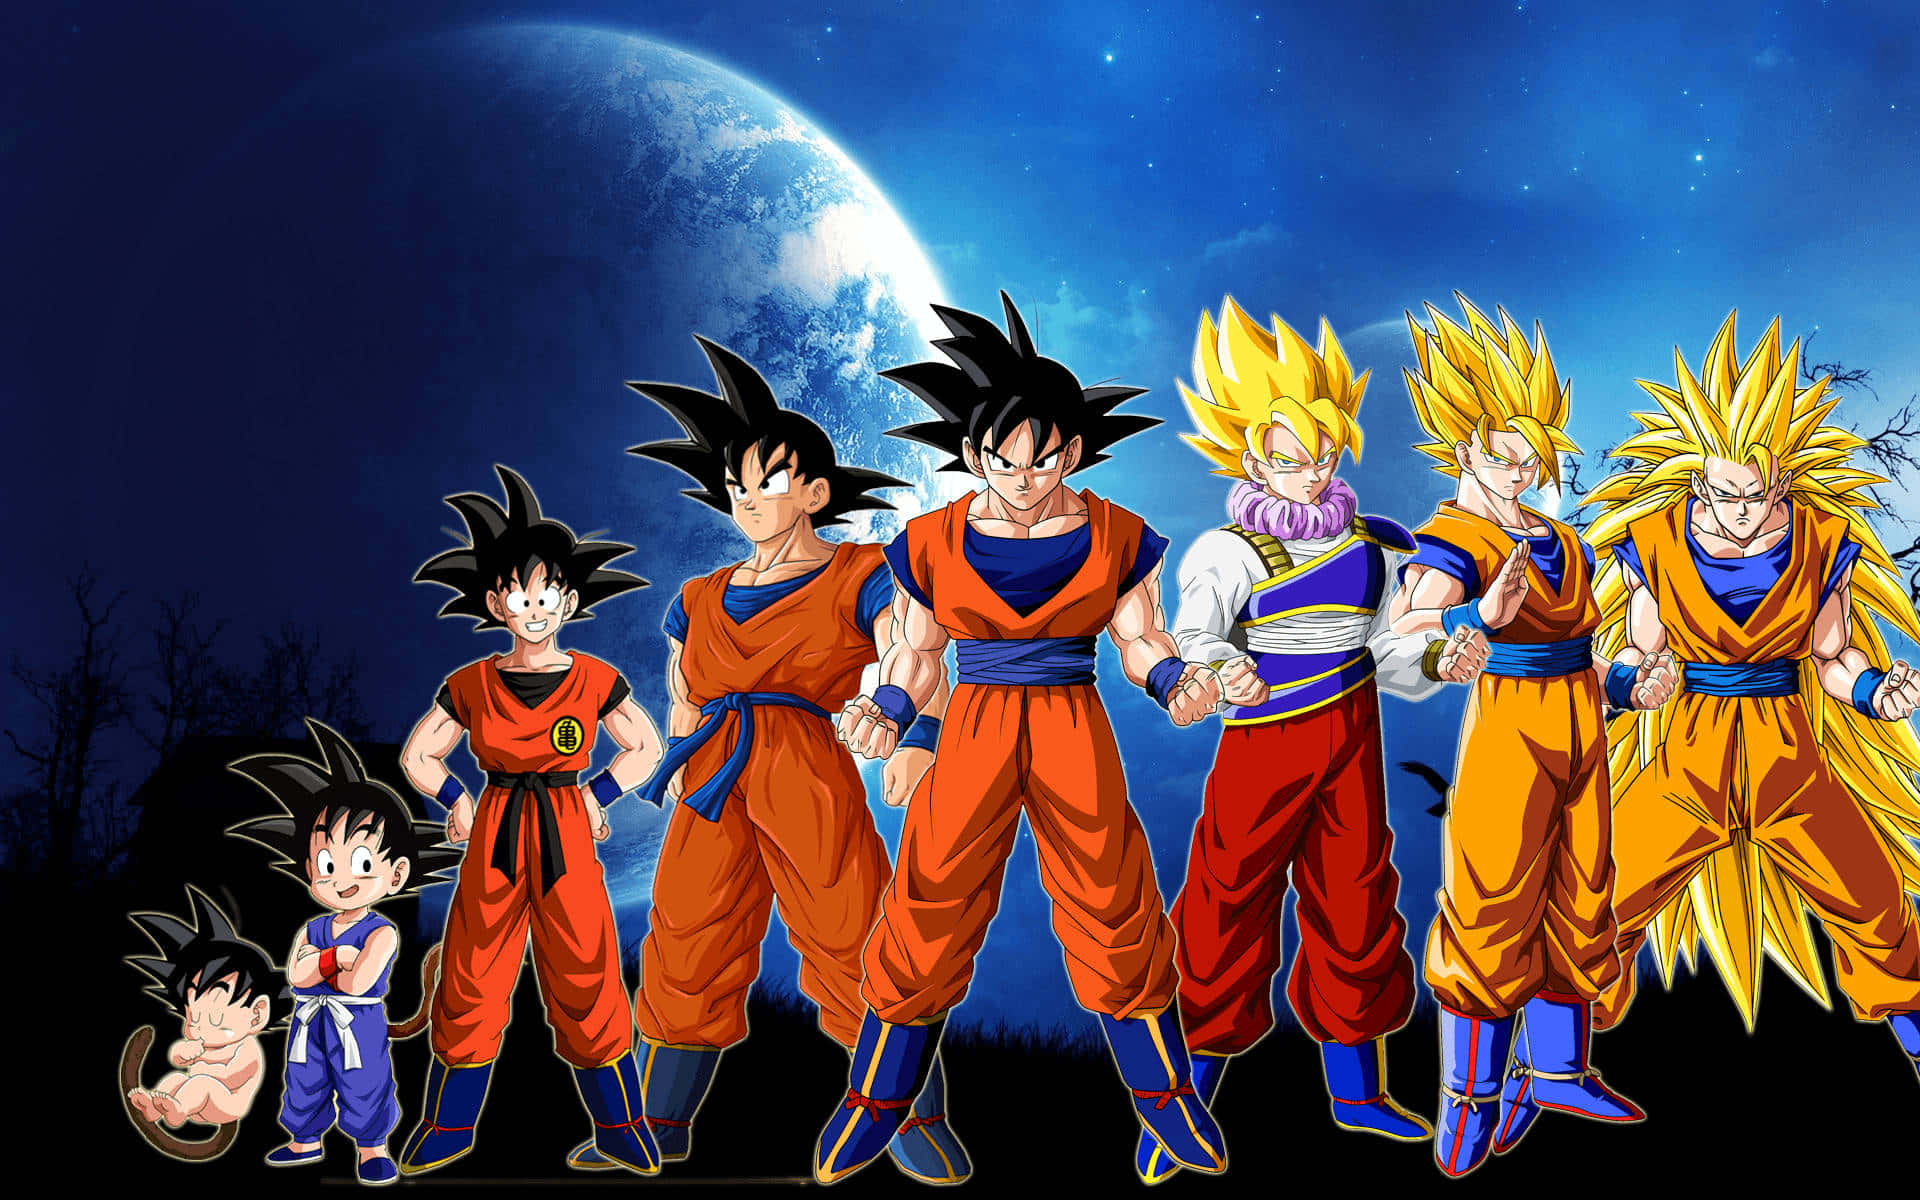 Gather Earth's finest, the fate of the universe lies in the Saiyans.